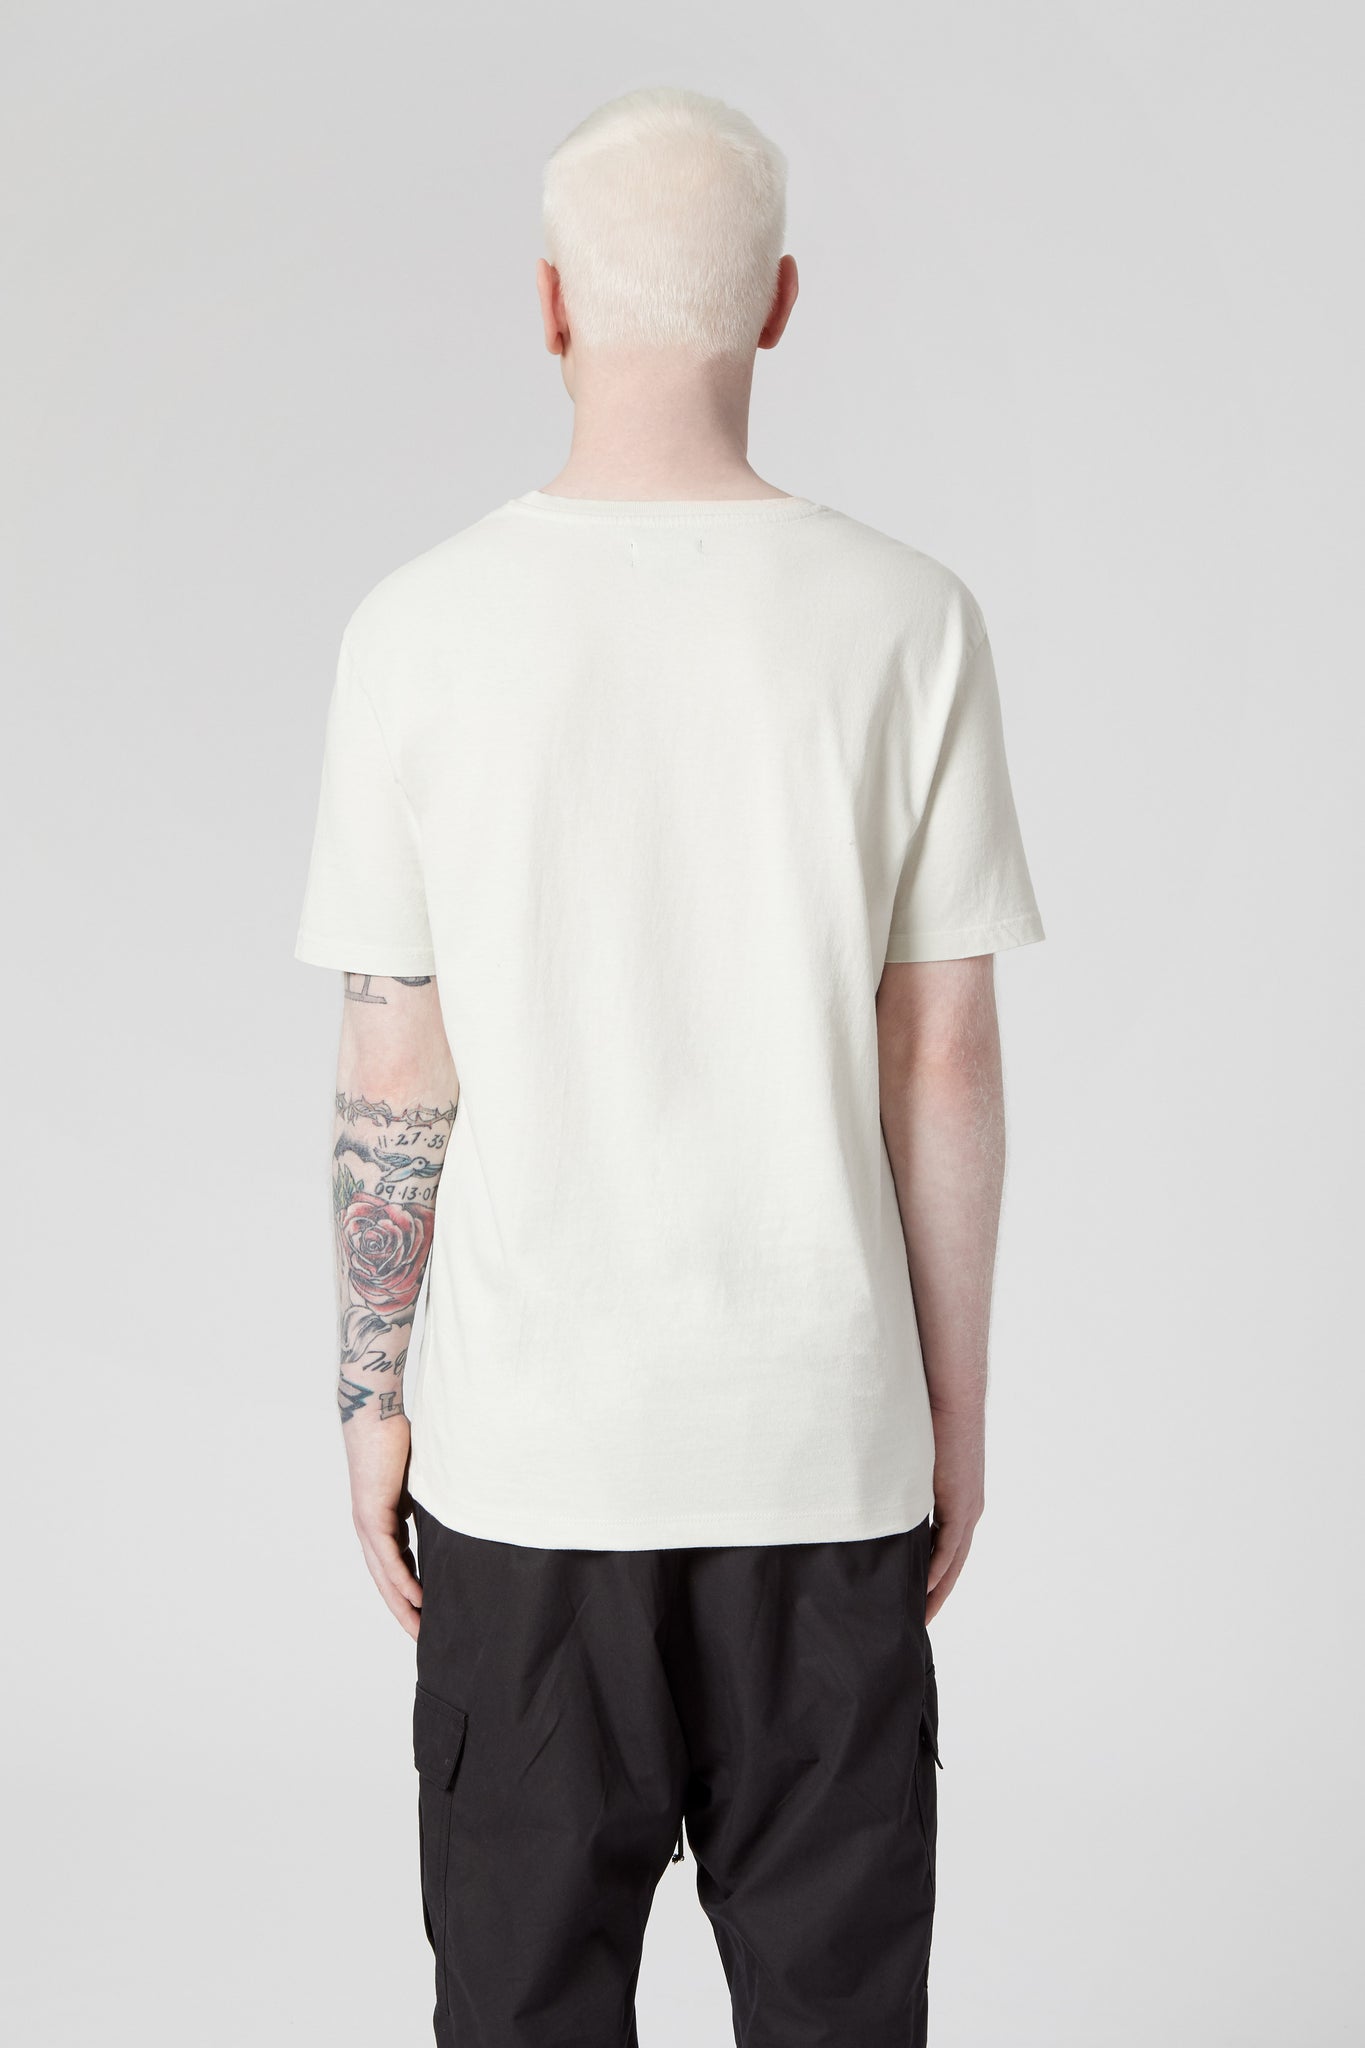 Oyster White Tee